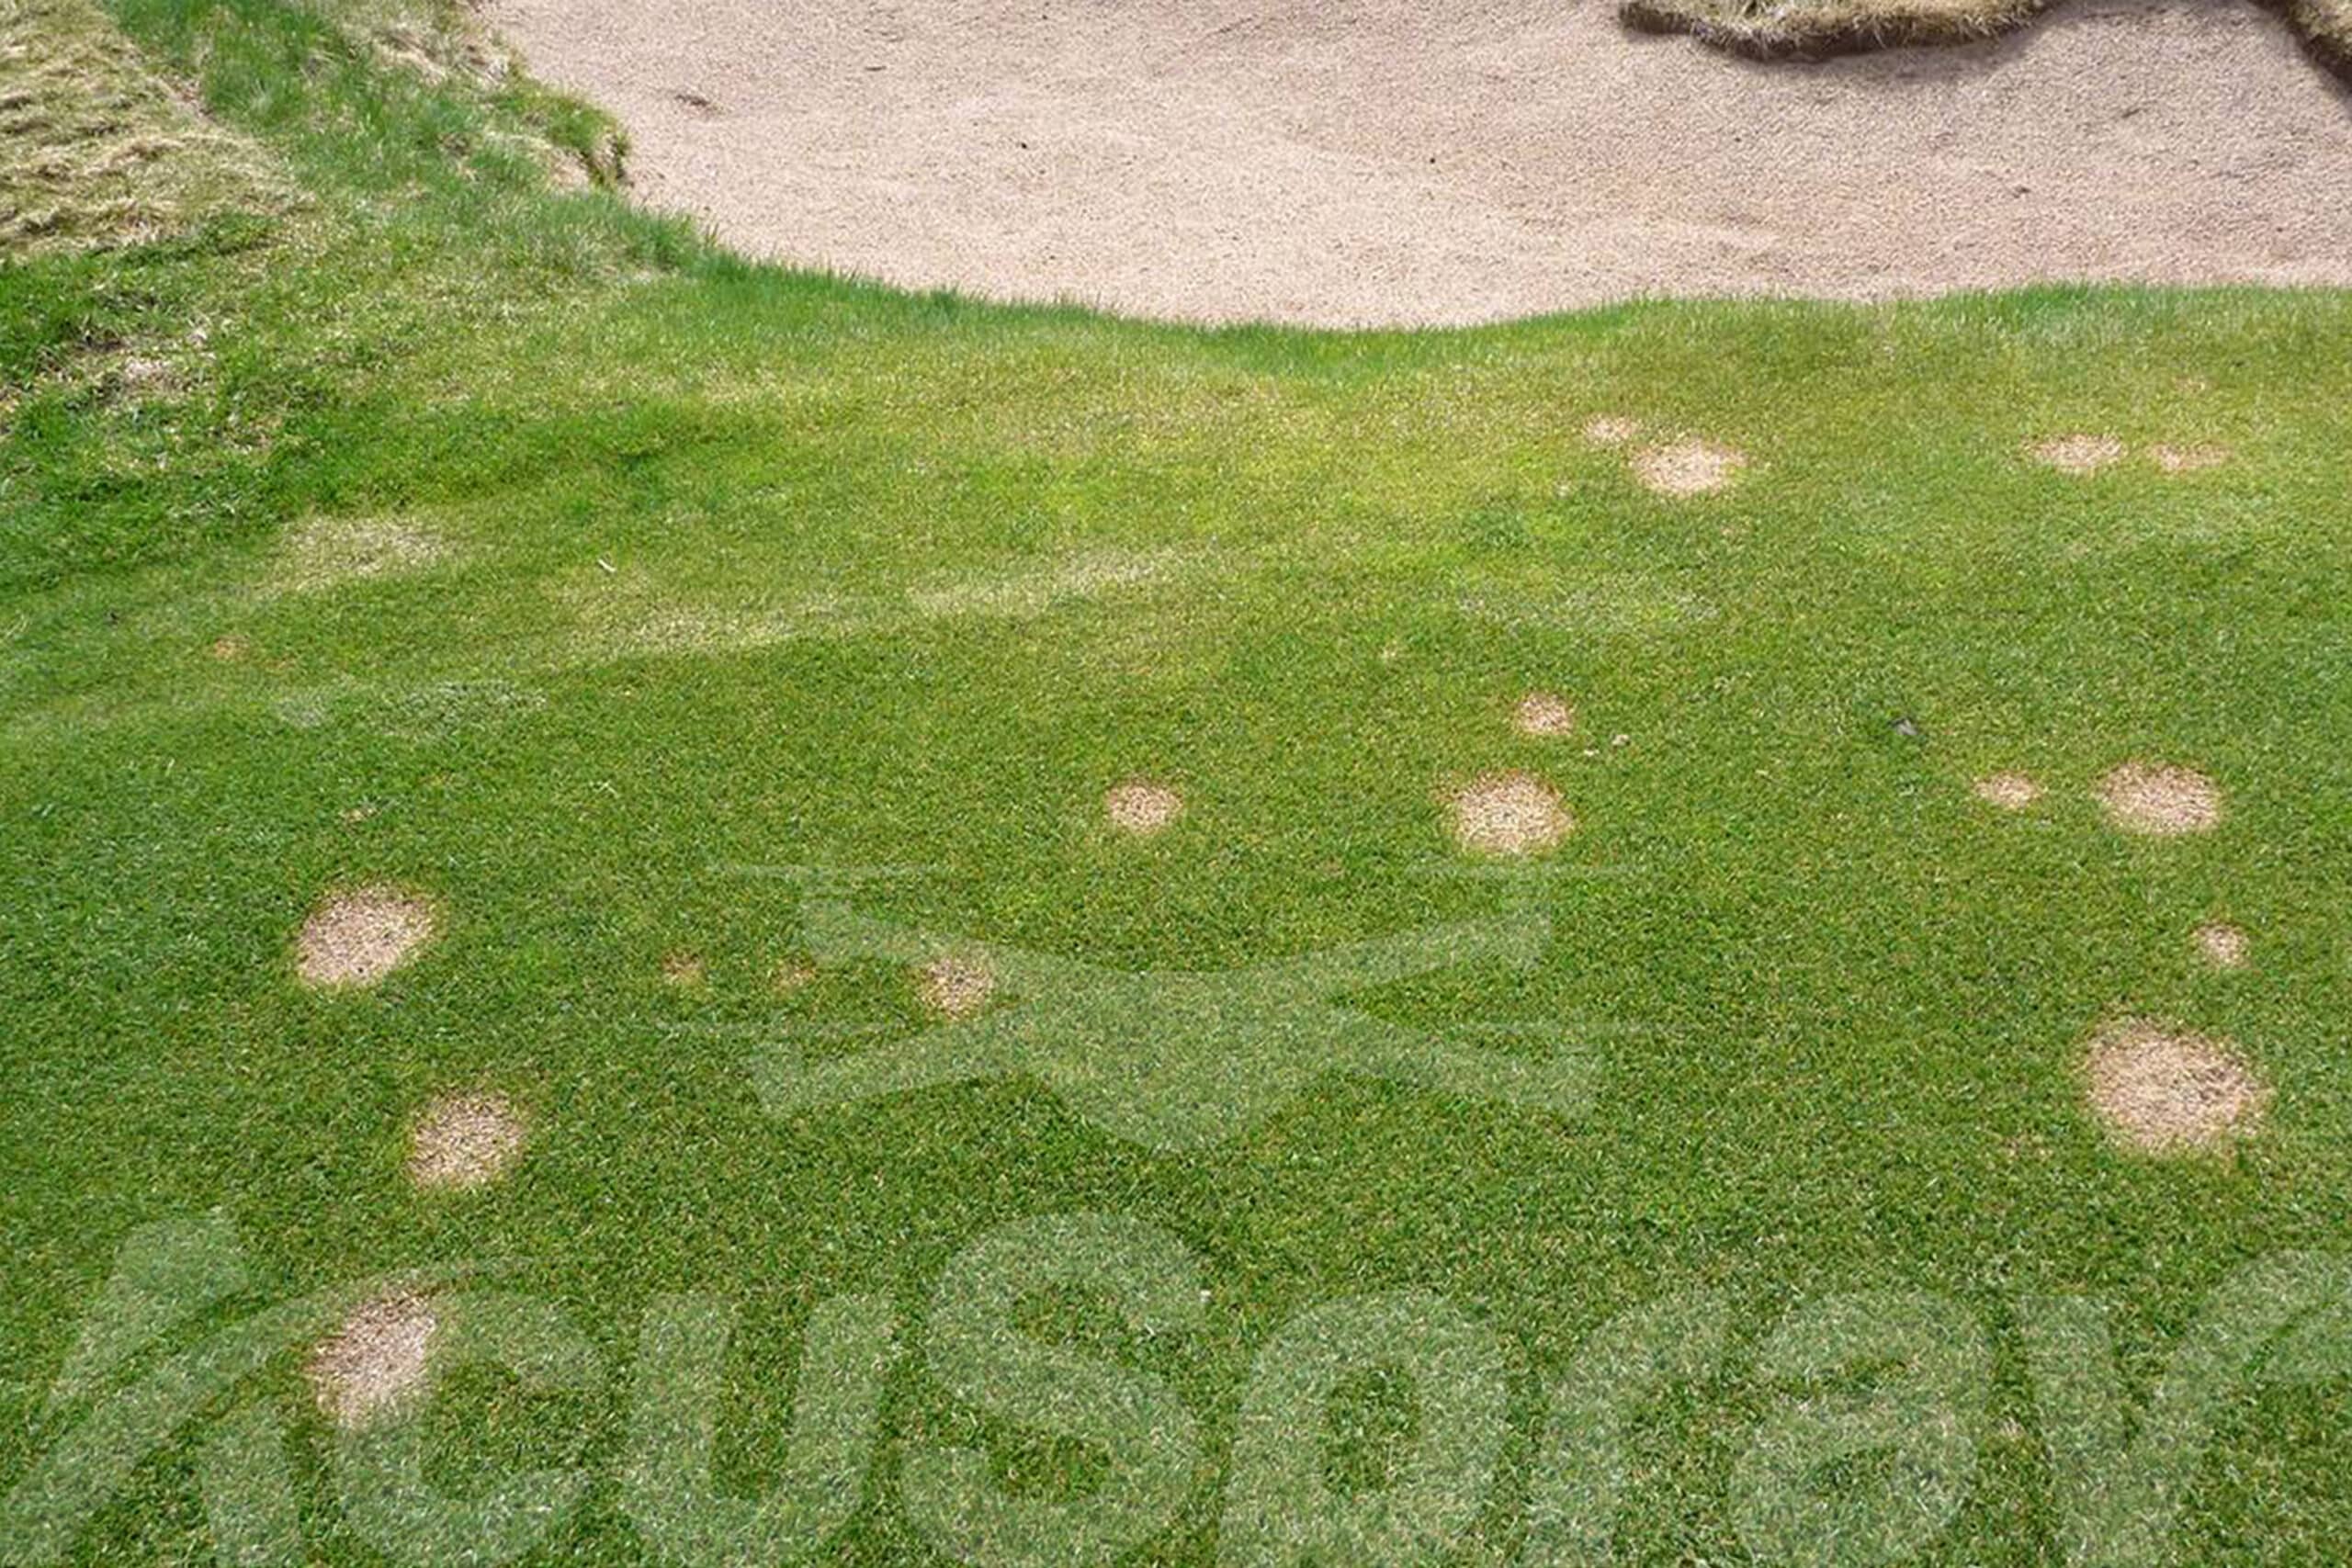 Beautiful green golf course disrupted by irregular brown spots indicating snow mold.